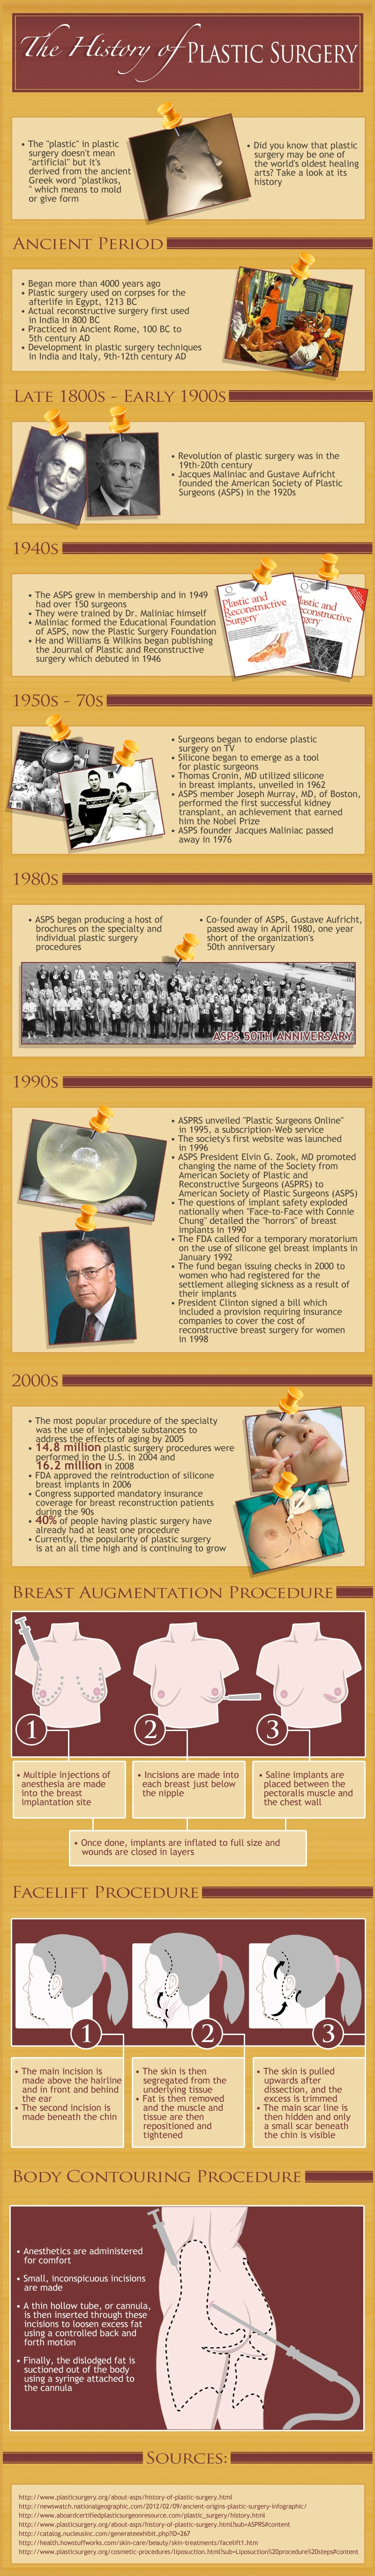 The Fascinating History of Plastic Surgery